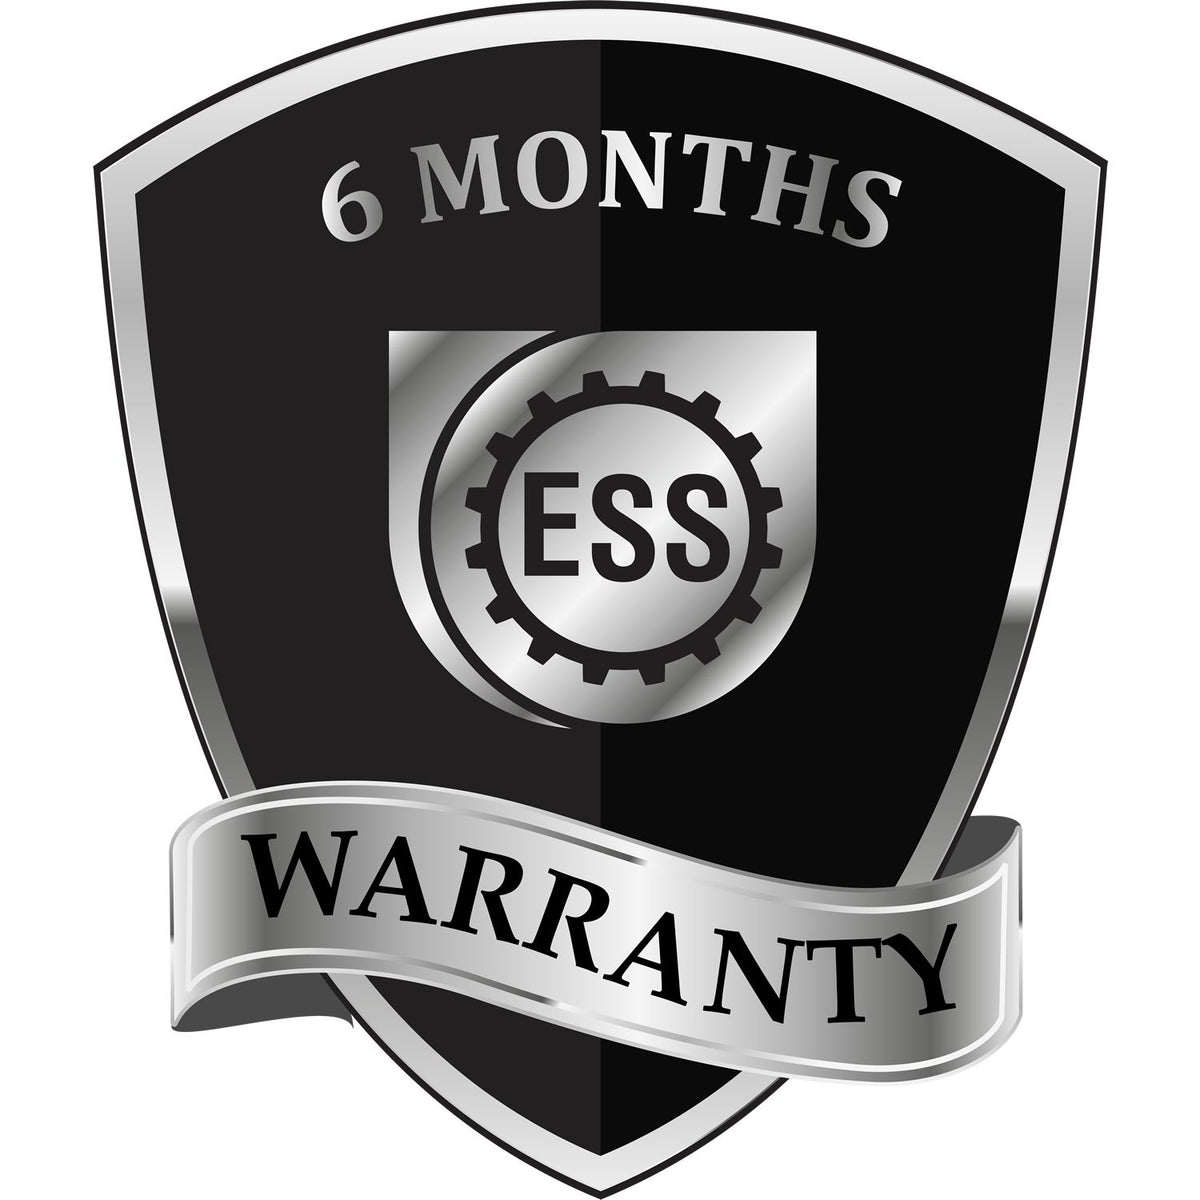 A badge or emblem showing a warranty icon for the Slim Pre-Inked Guam Professional Engineer Seal Stamp